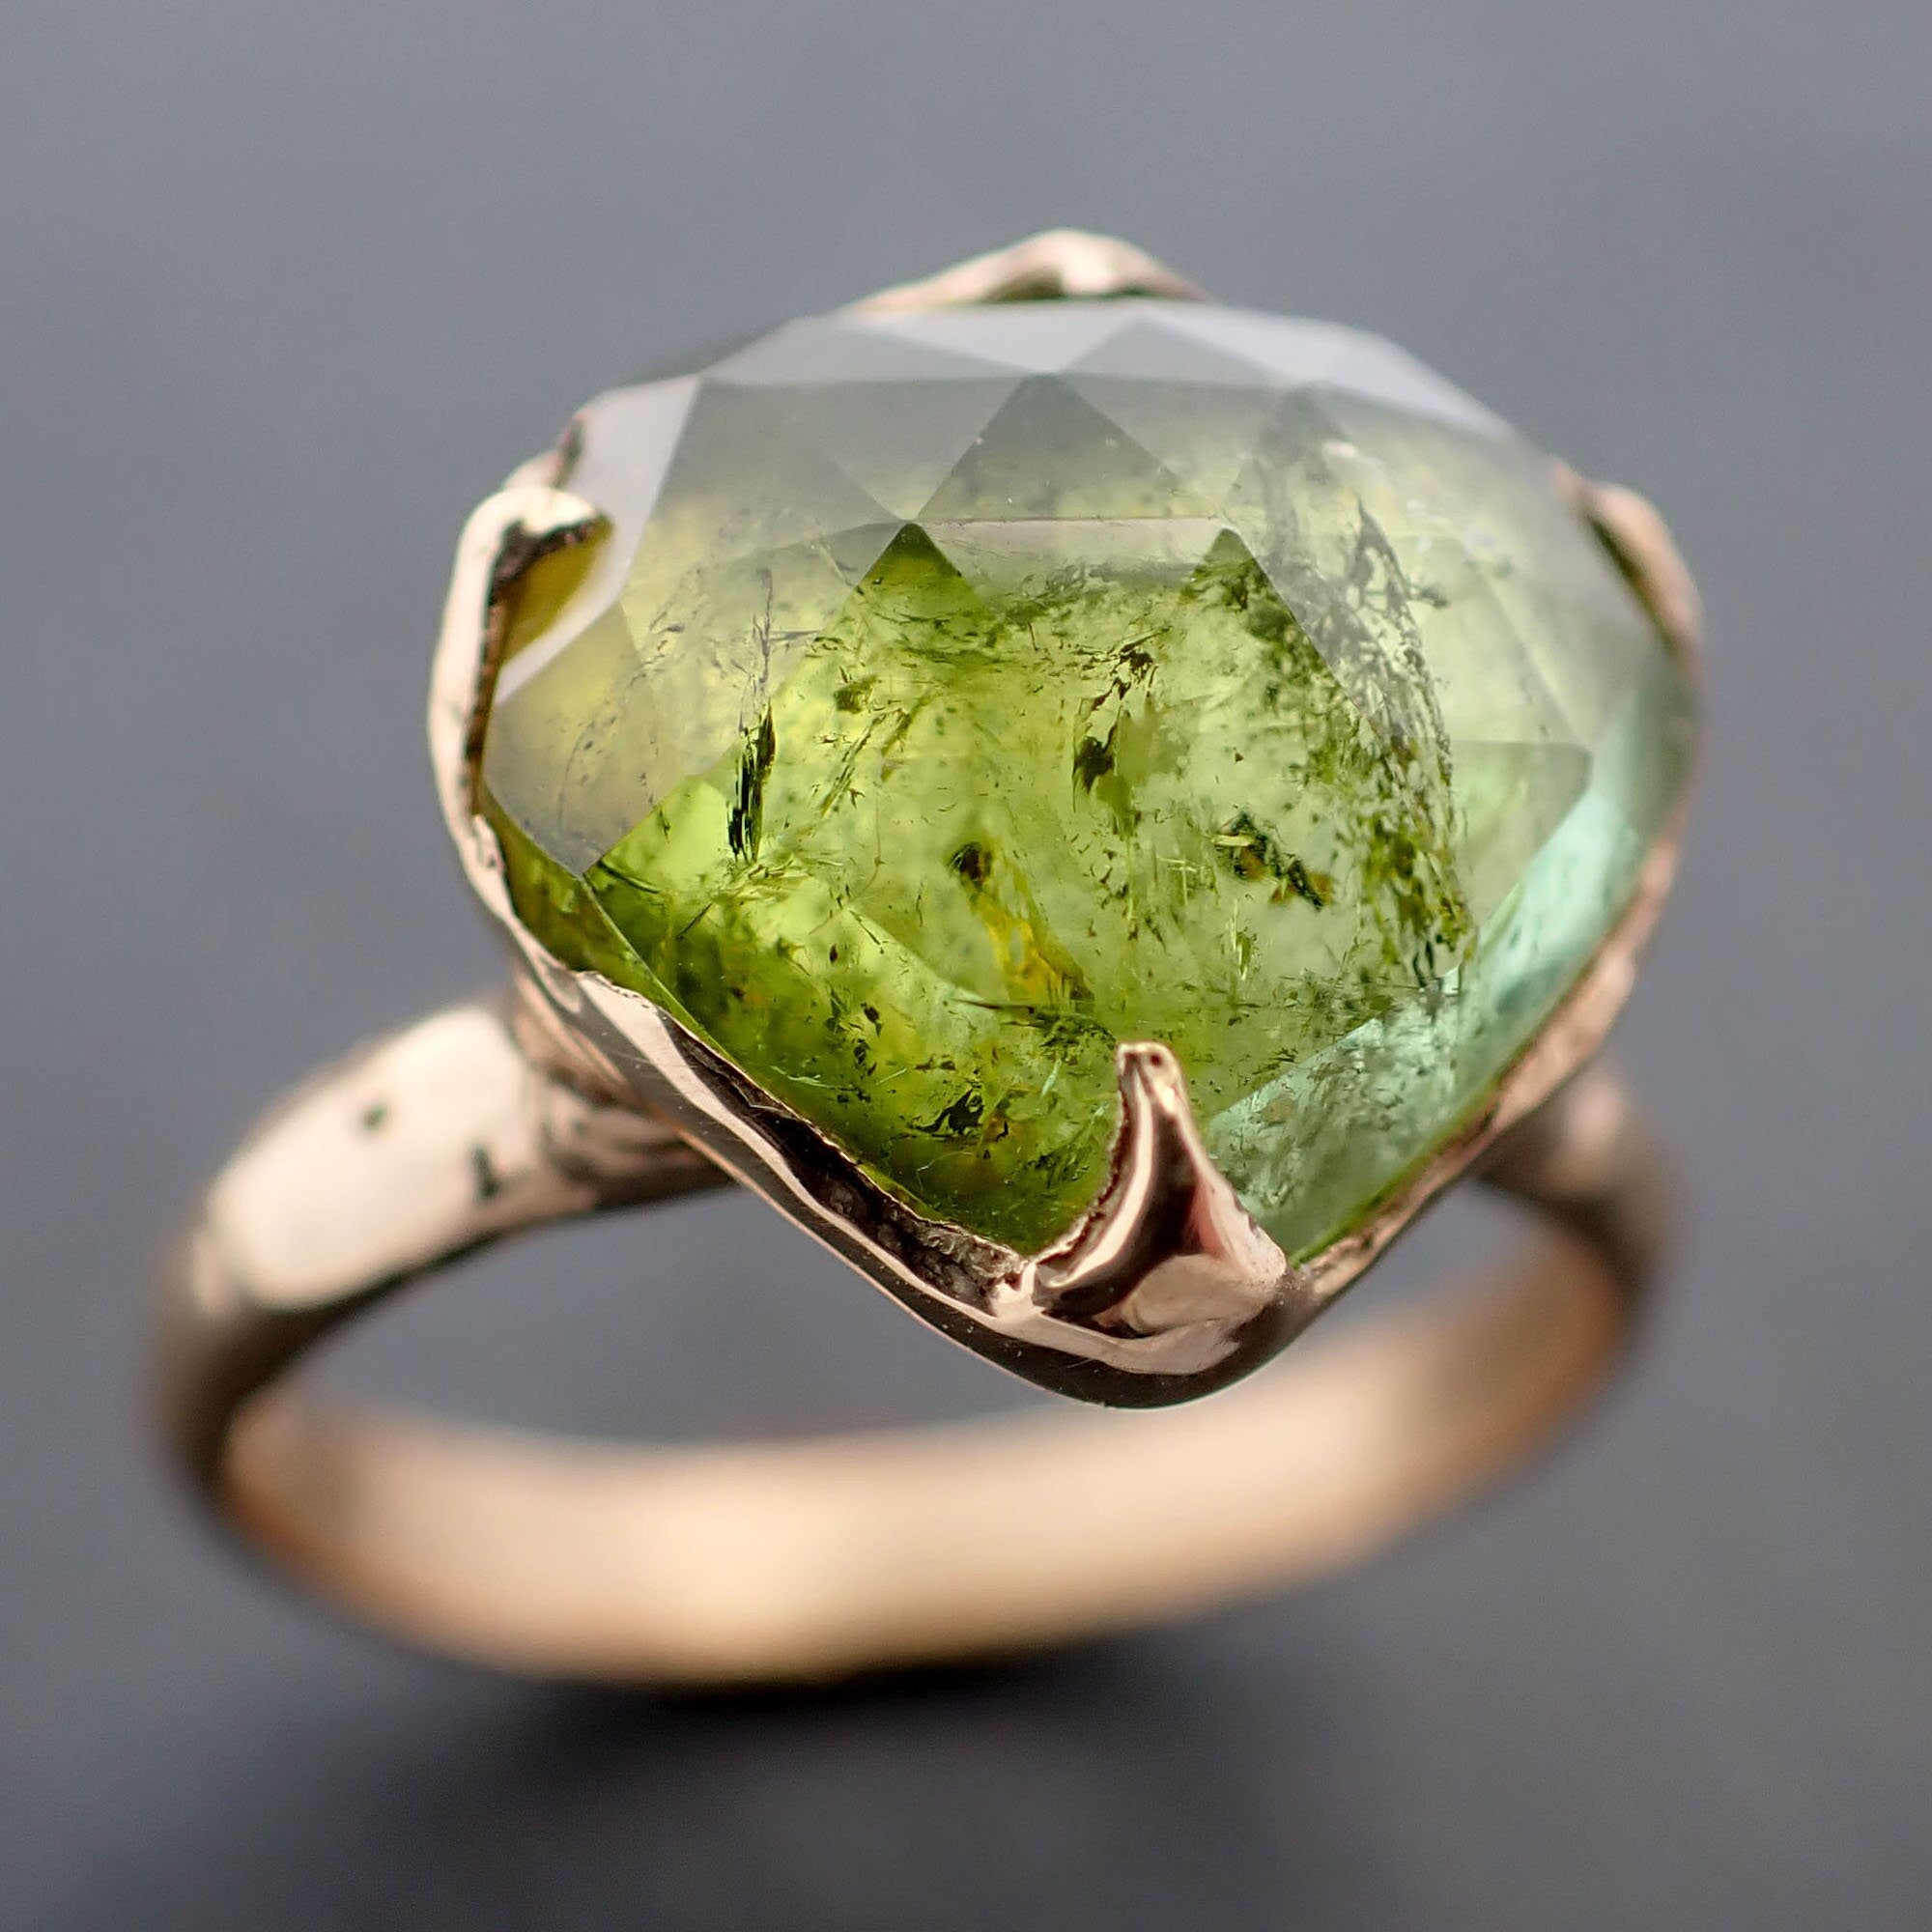 Green Tourmaline Yellow 18k Gold Ring Gemstone Solitaire Fancy cut recycled statement / cocktail 3359